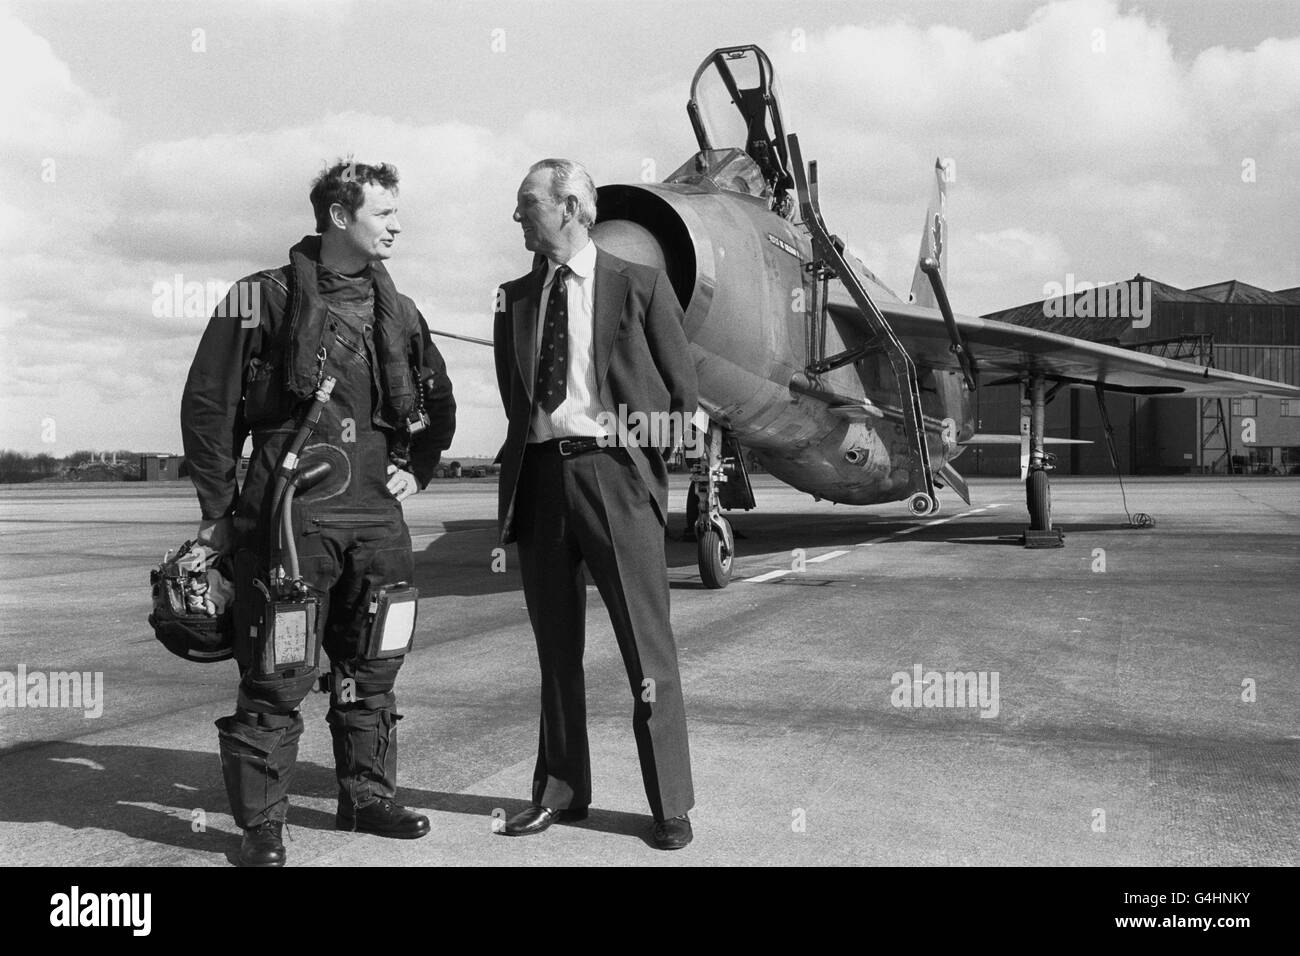 Eleven Squadron Wing Commander Jake Jarron (left) relaxes after flying his English Electric Lightning jet fighter at RAF Binbrook for the last time, as the aircraft have been withdrawn from service.With him is Air Vice Marshall John Howe who is the Commander of 74 'The Tigers' Squadron. Stock Photo